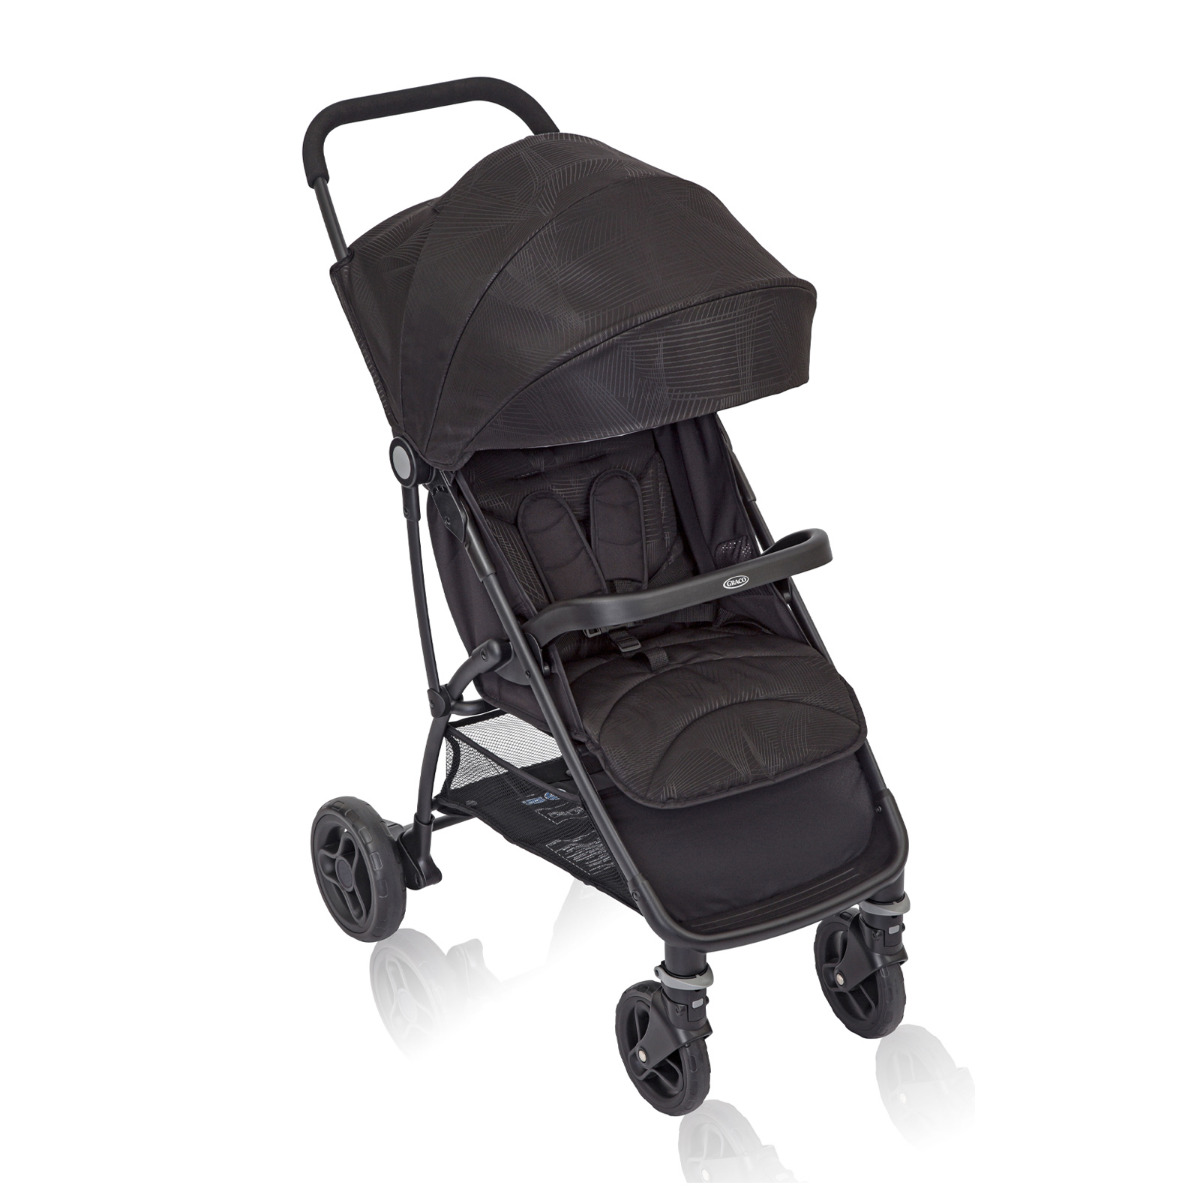 Graco Breaze Lite stroller front facing angle with handlebar